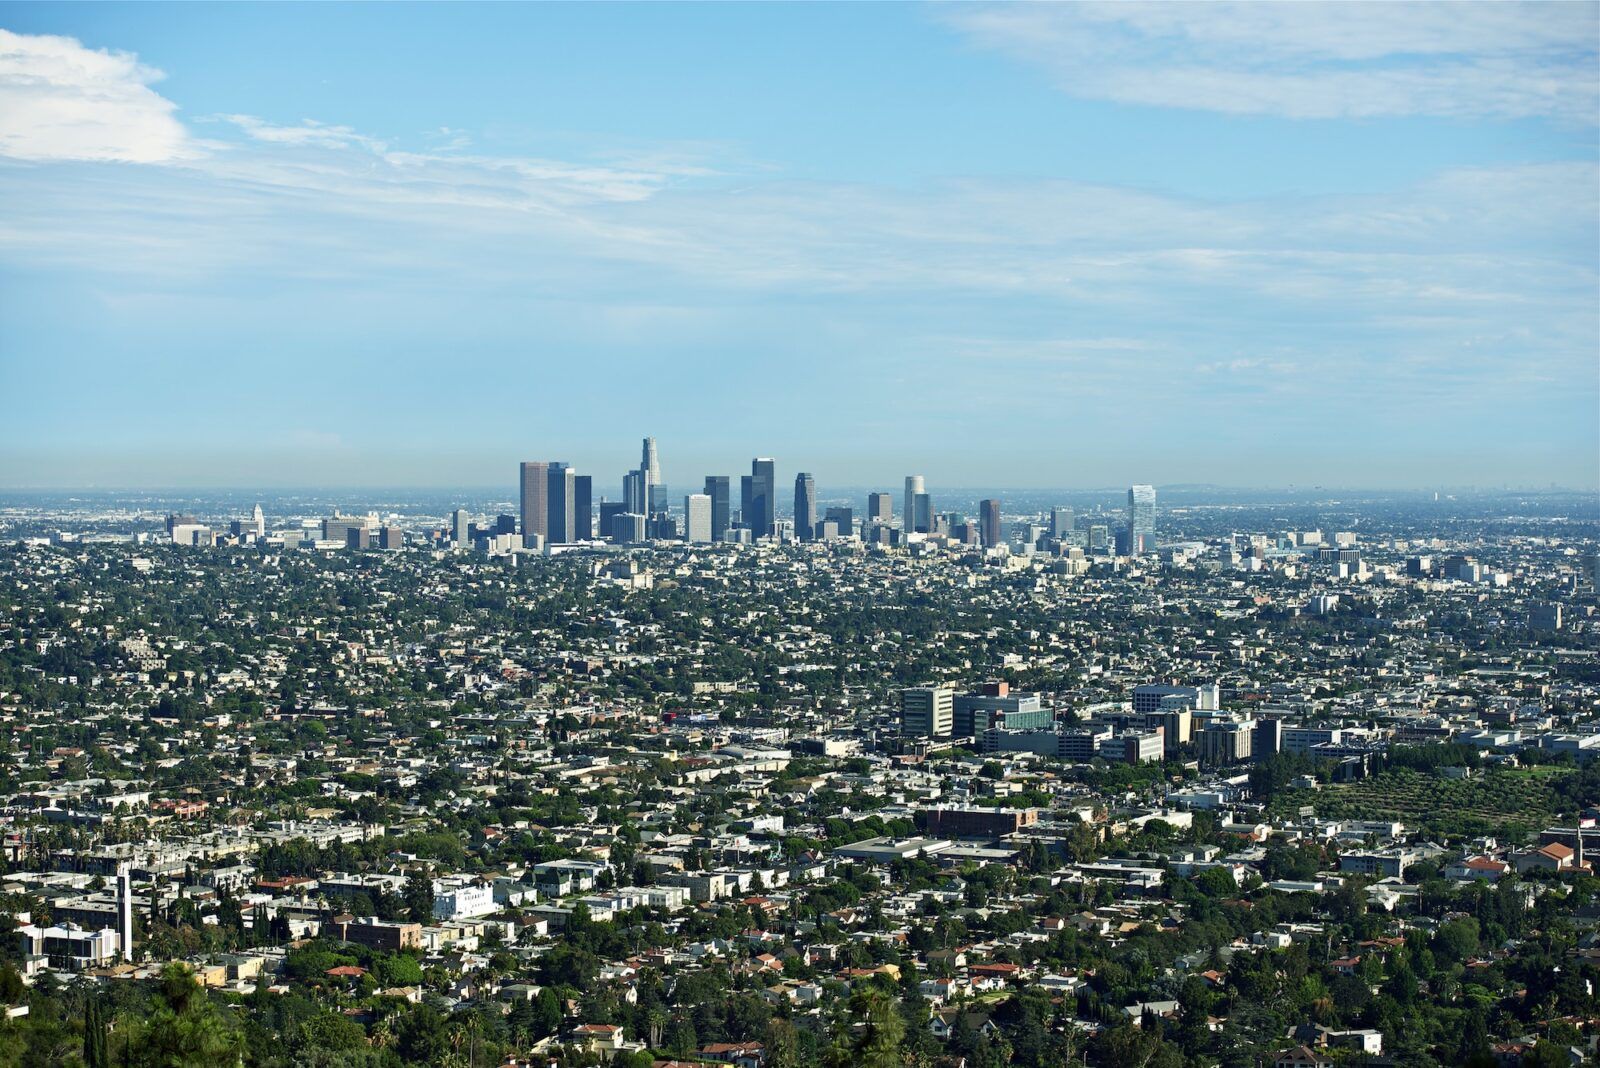 Cityscapes: Los Angeles